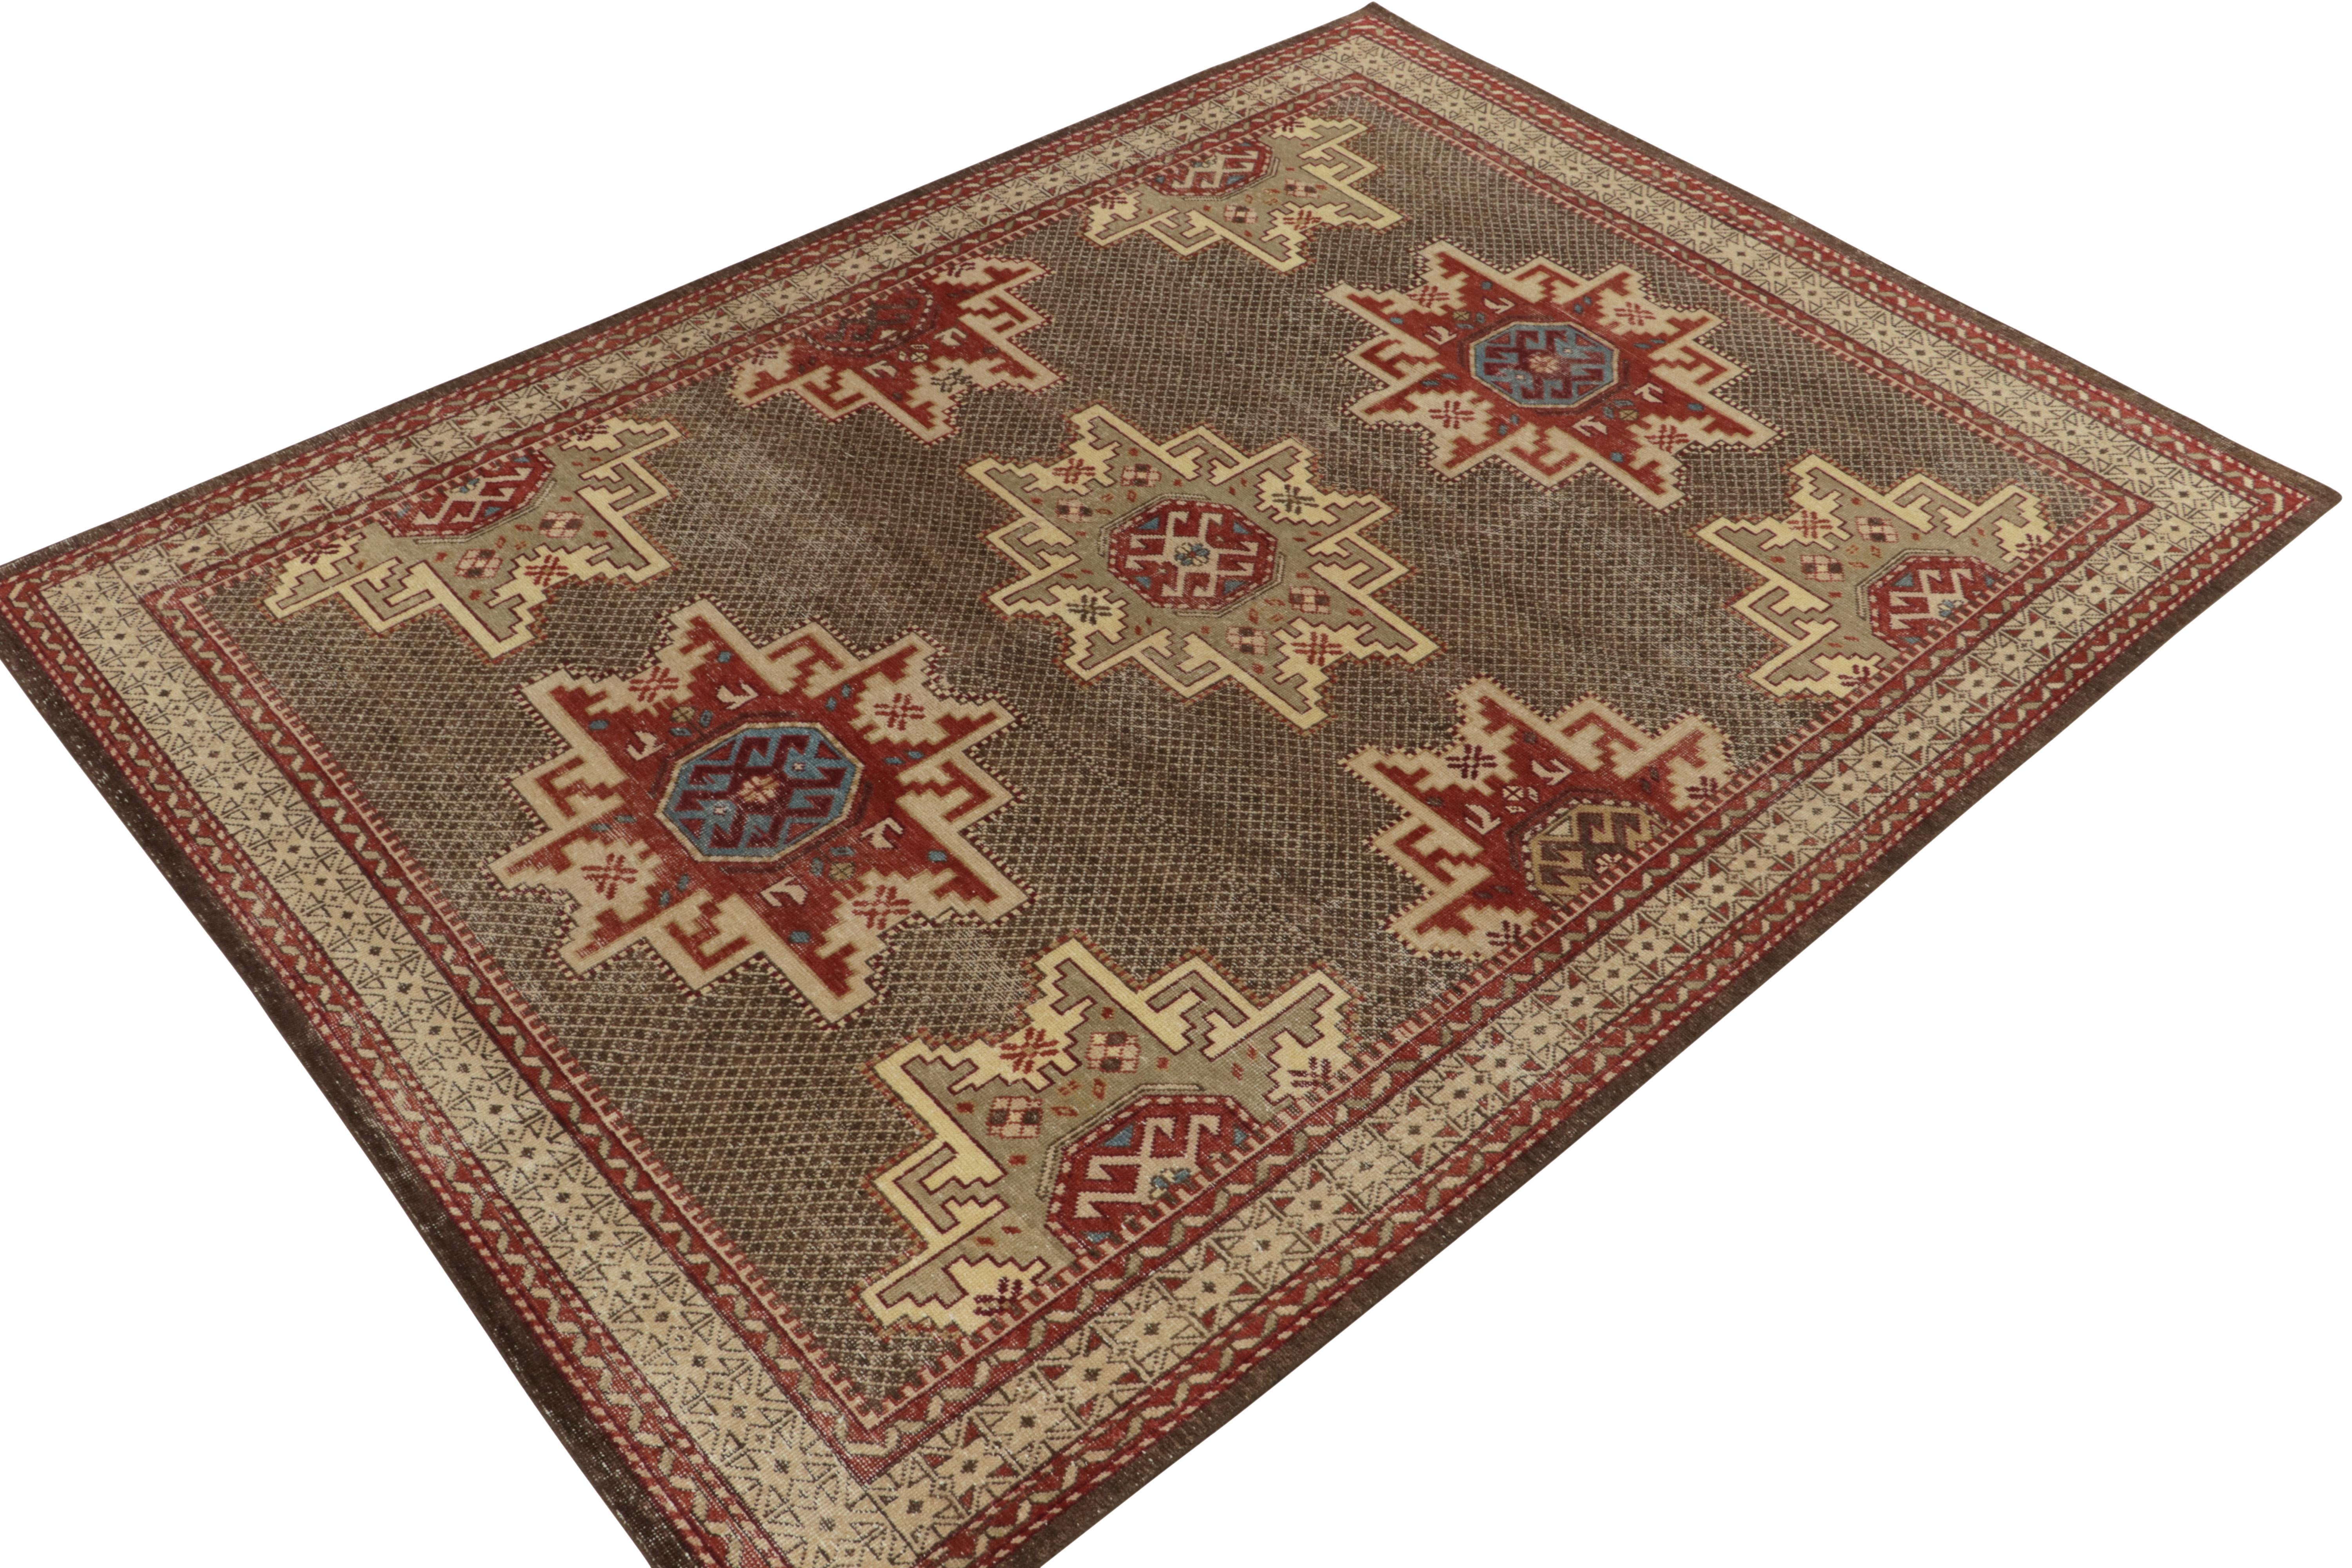 From Rug & Kilim’s Homage collection, a 9x12 distressed style tribal rug inspired from the celebrated Caucasian Kuba style. Hand-knotted in wool, the rustic vision preaches tradition with tribal patterns engulfing the connoted Lesghi star motif in